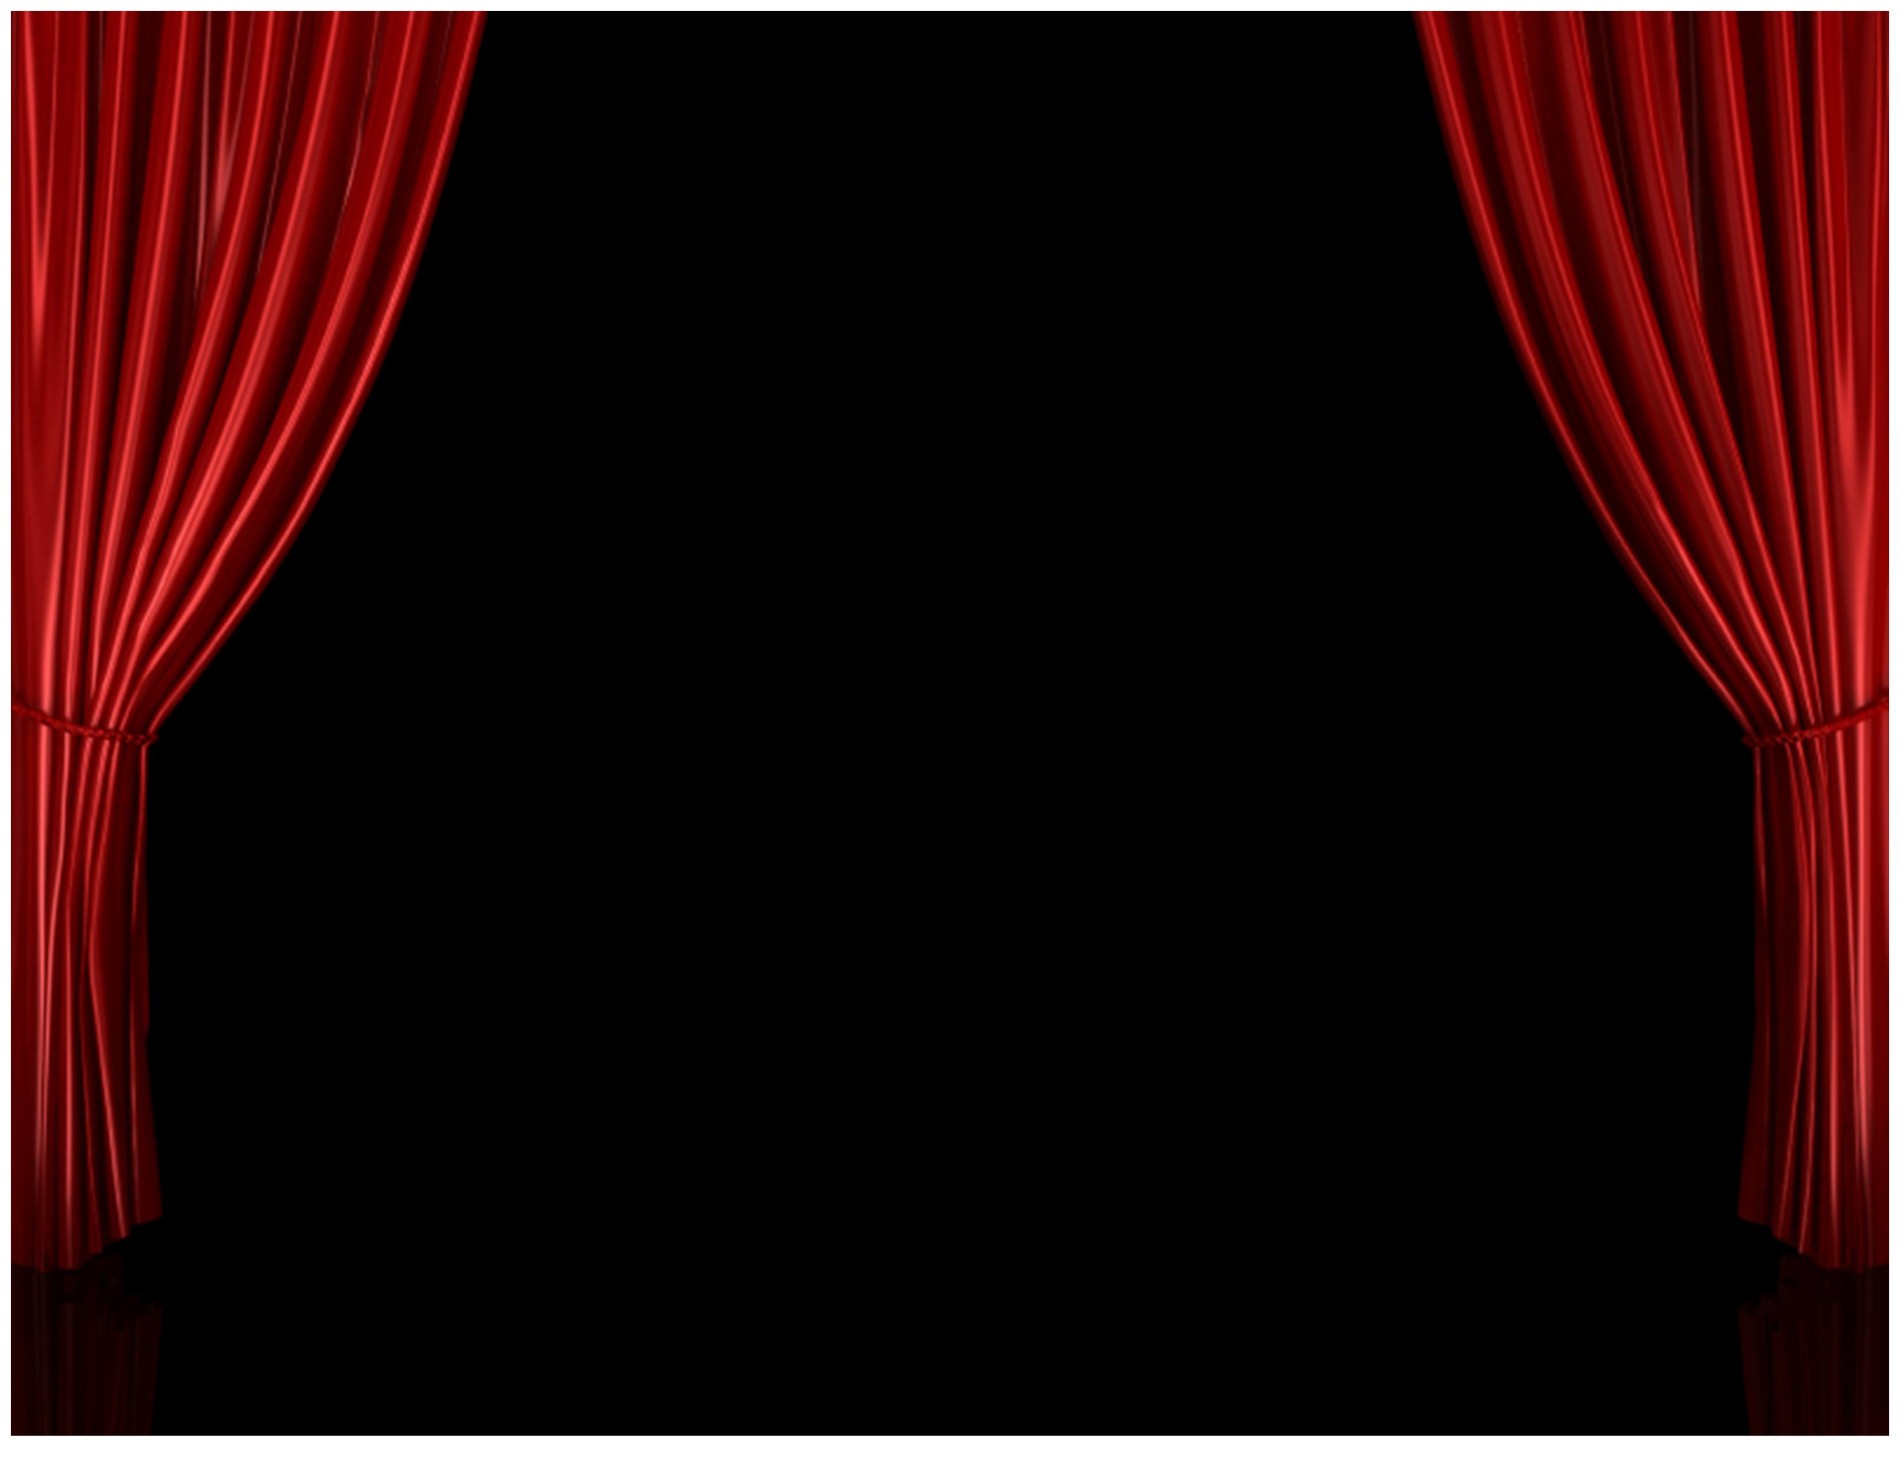 Movie Curtain Clipart Movie Theater Curtain Stage